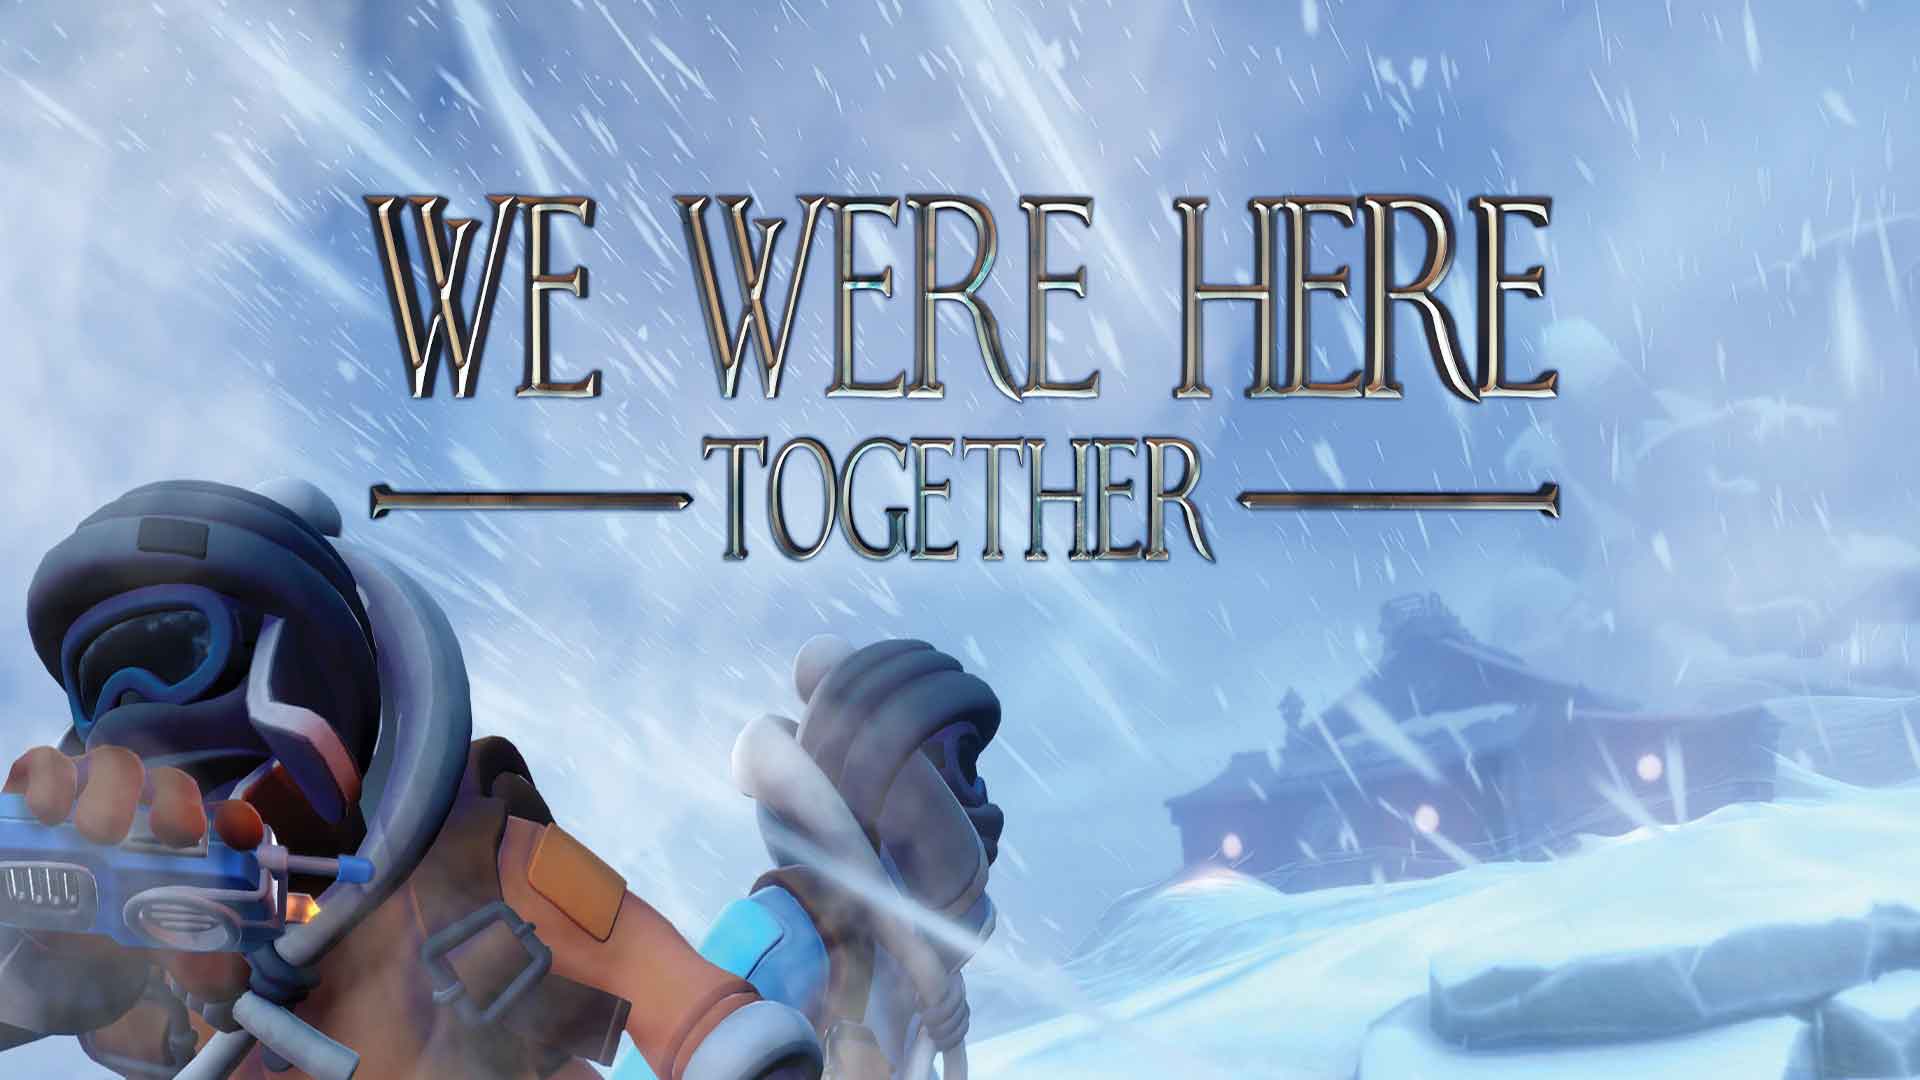 we were here together demo download free